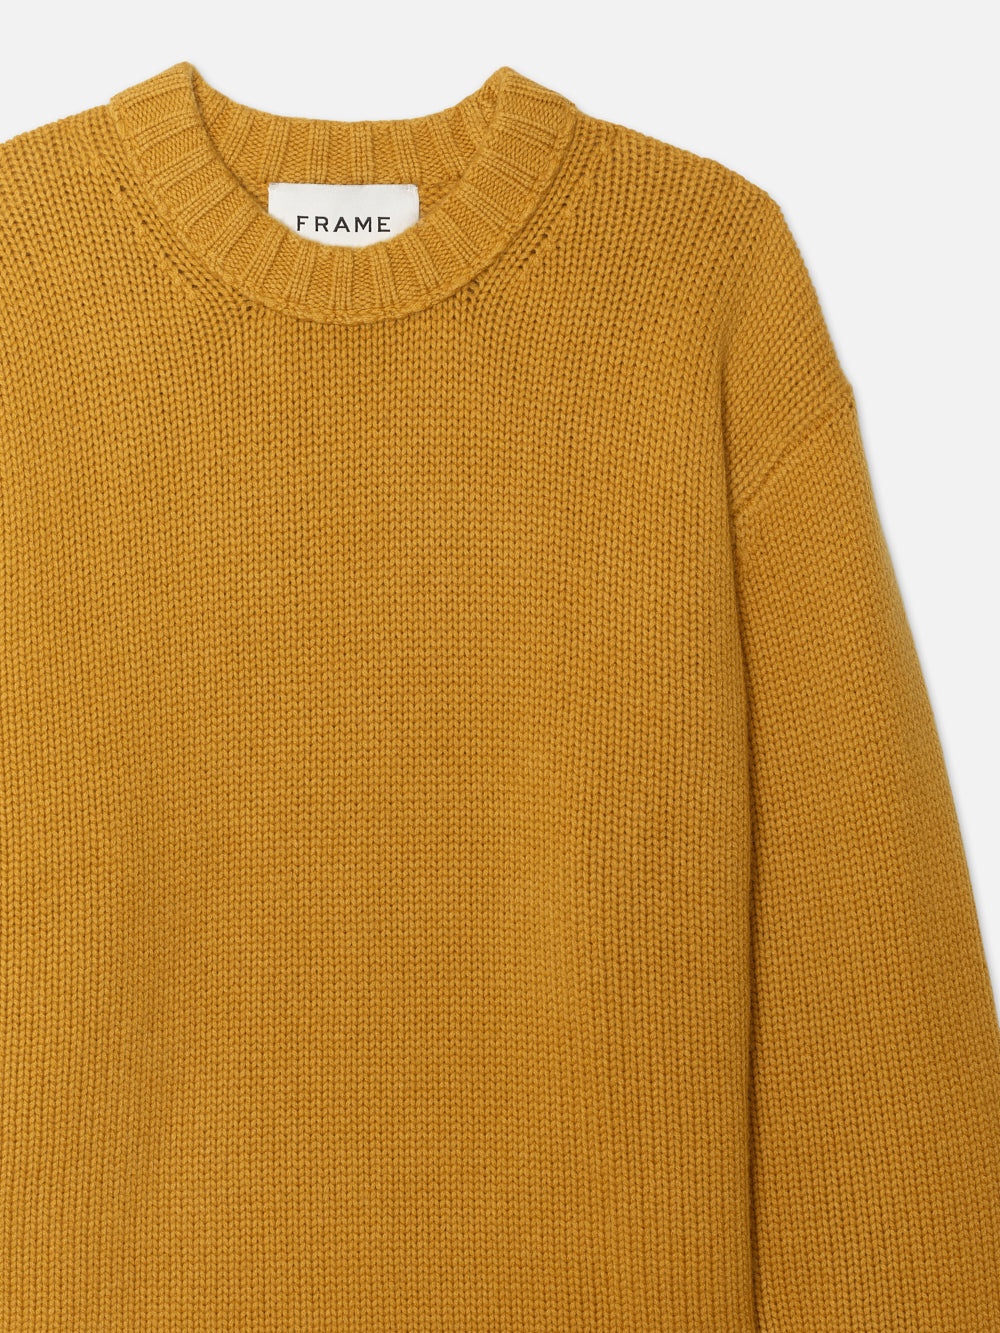 Destroyed Cashmere Sweater in Yellow - 2